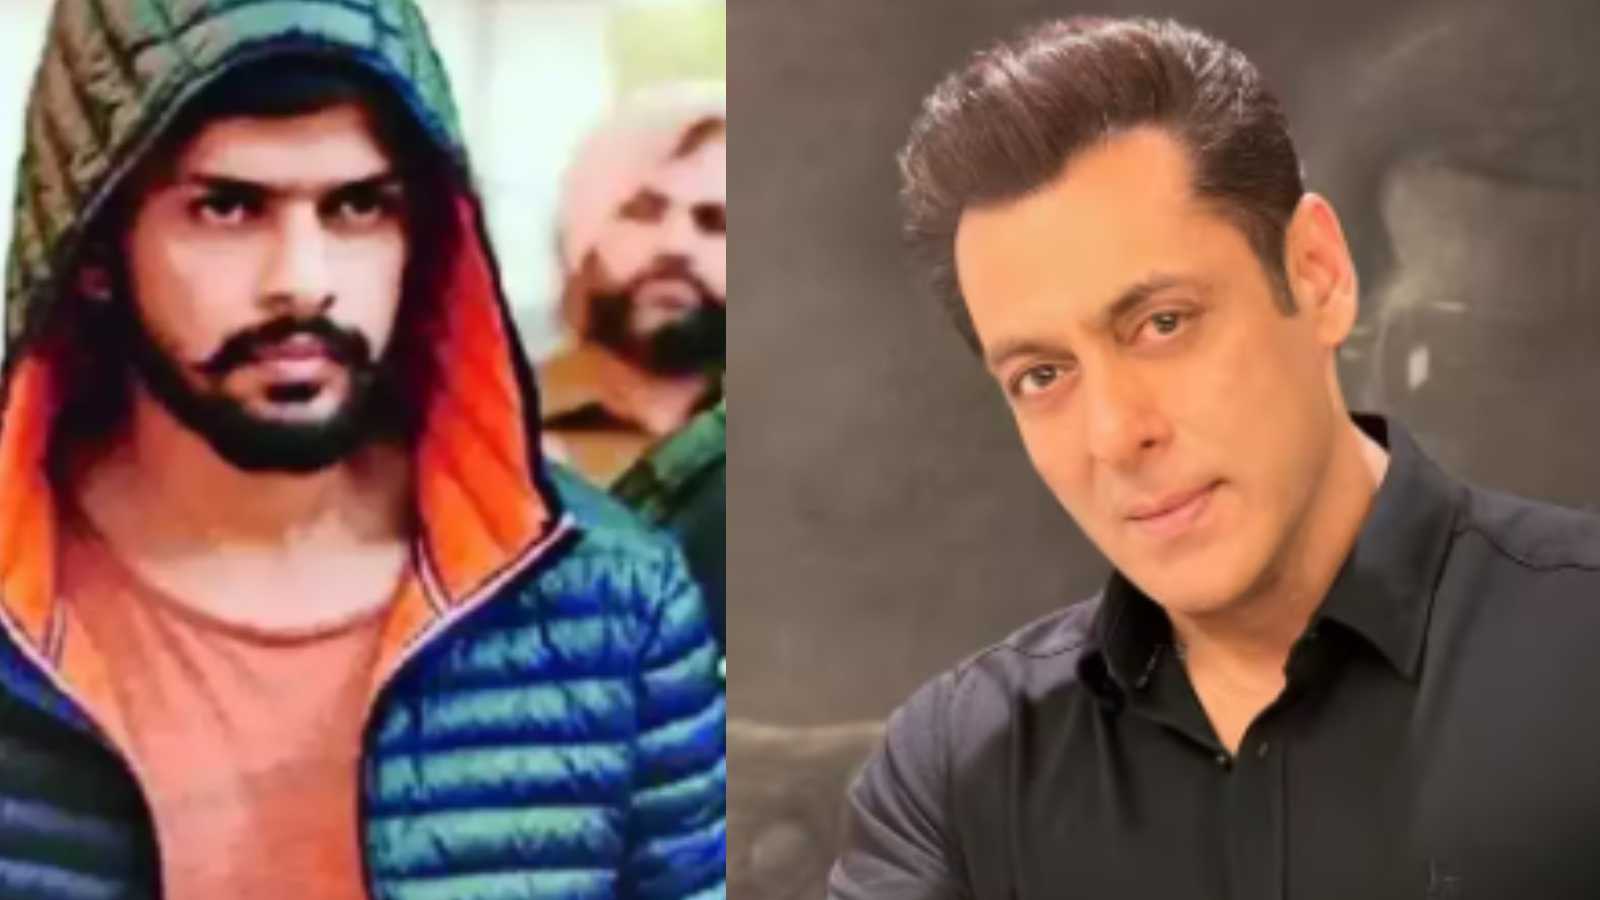 'Message is for Salman Khan': Lawrence Bishnoi fires gunshot at Gippy Grewal's home with a warning for the superstar